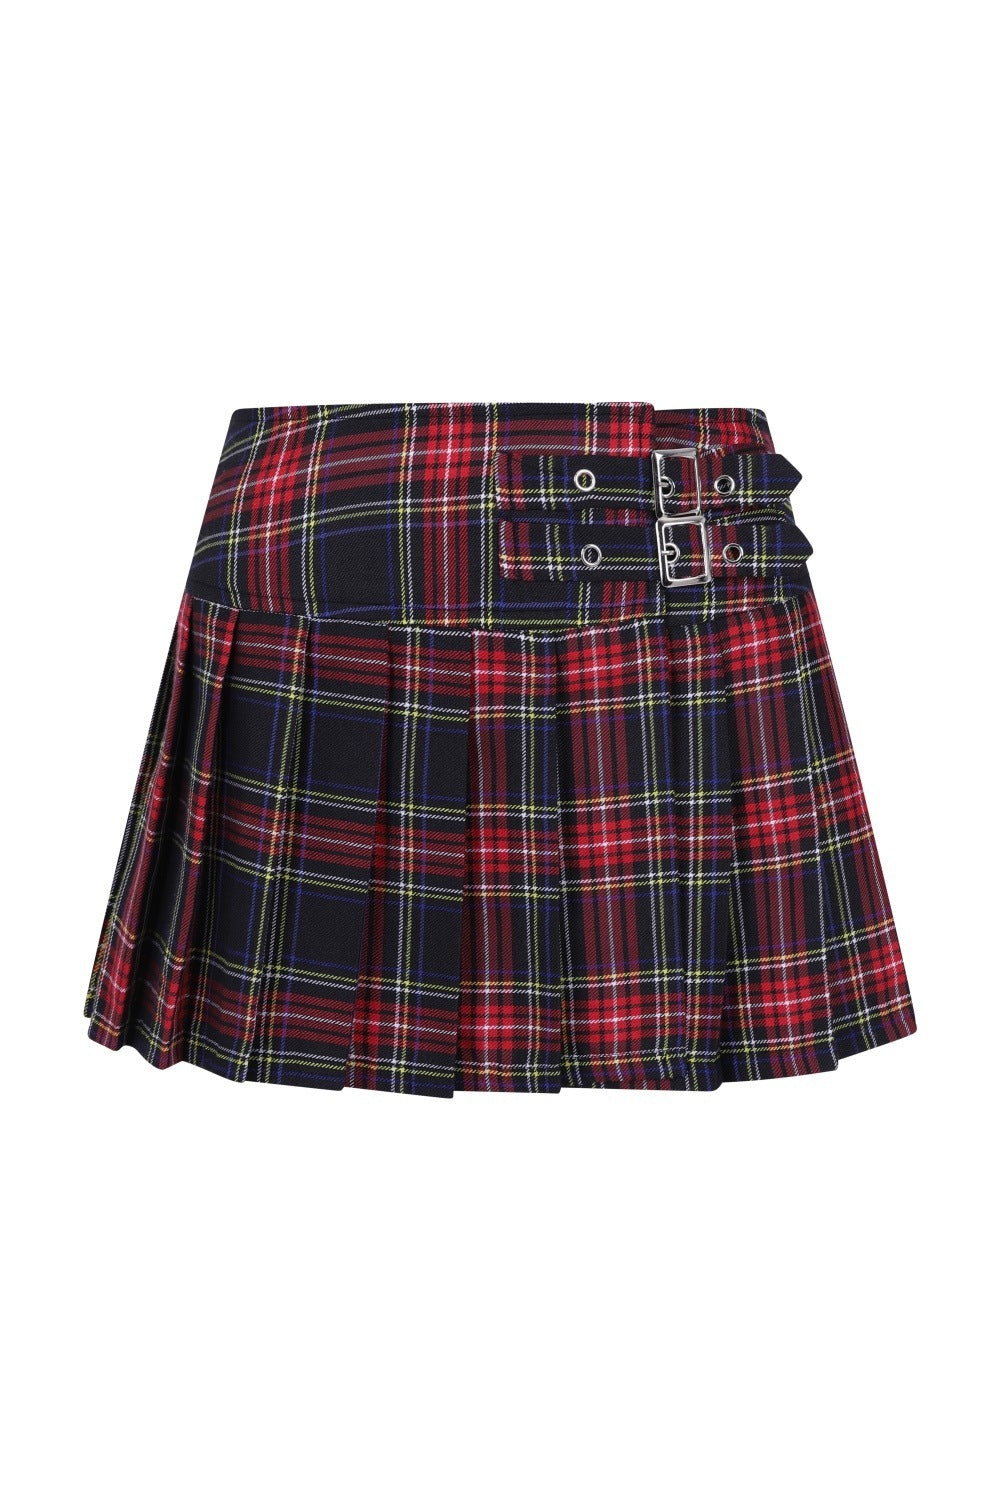 Ghost shot of red and navy tartan mini skirt with buckle features. 